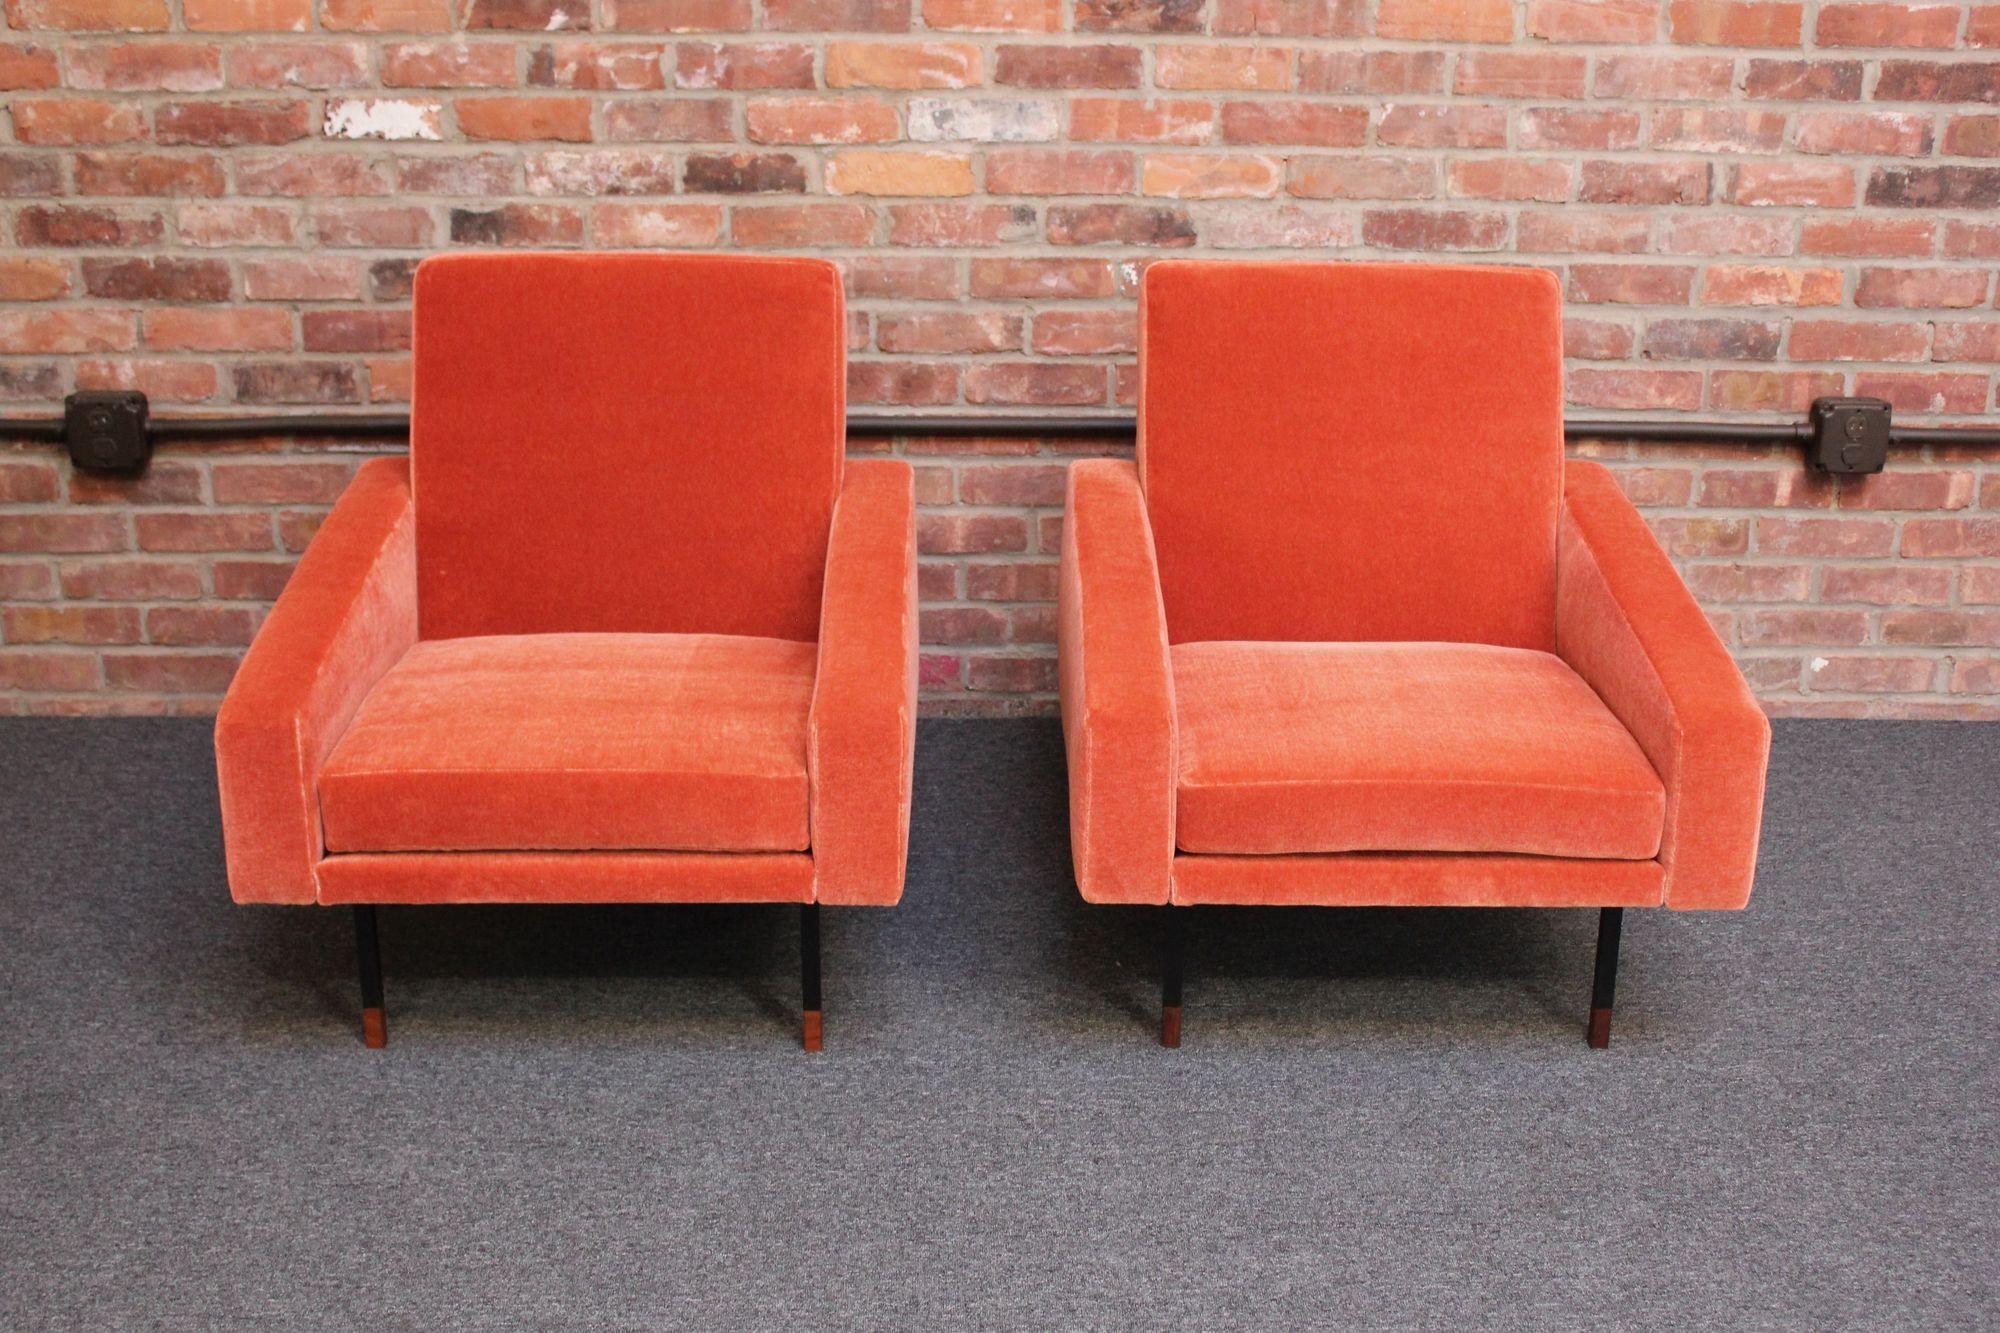 Pair of Italian Modernist Metal and Mohair Lounge Chairs by Campo and Graffi In Good Condition For Sale In Brooklyn, NY